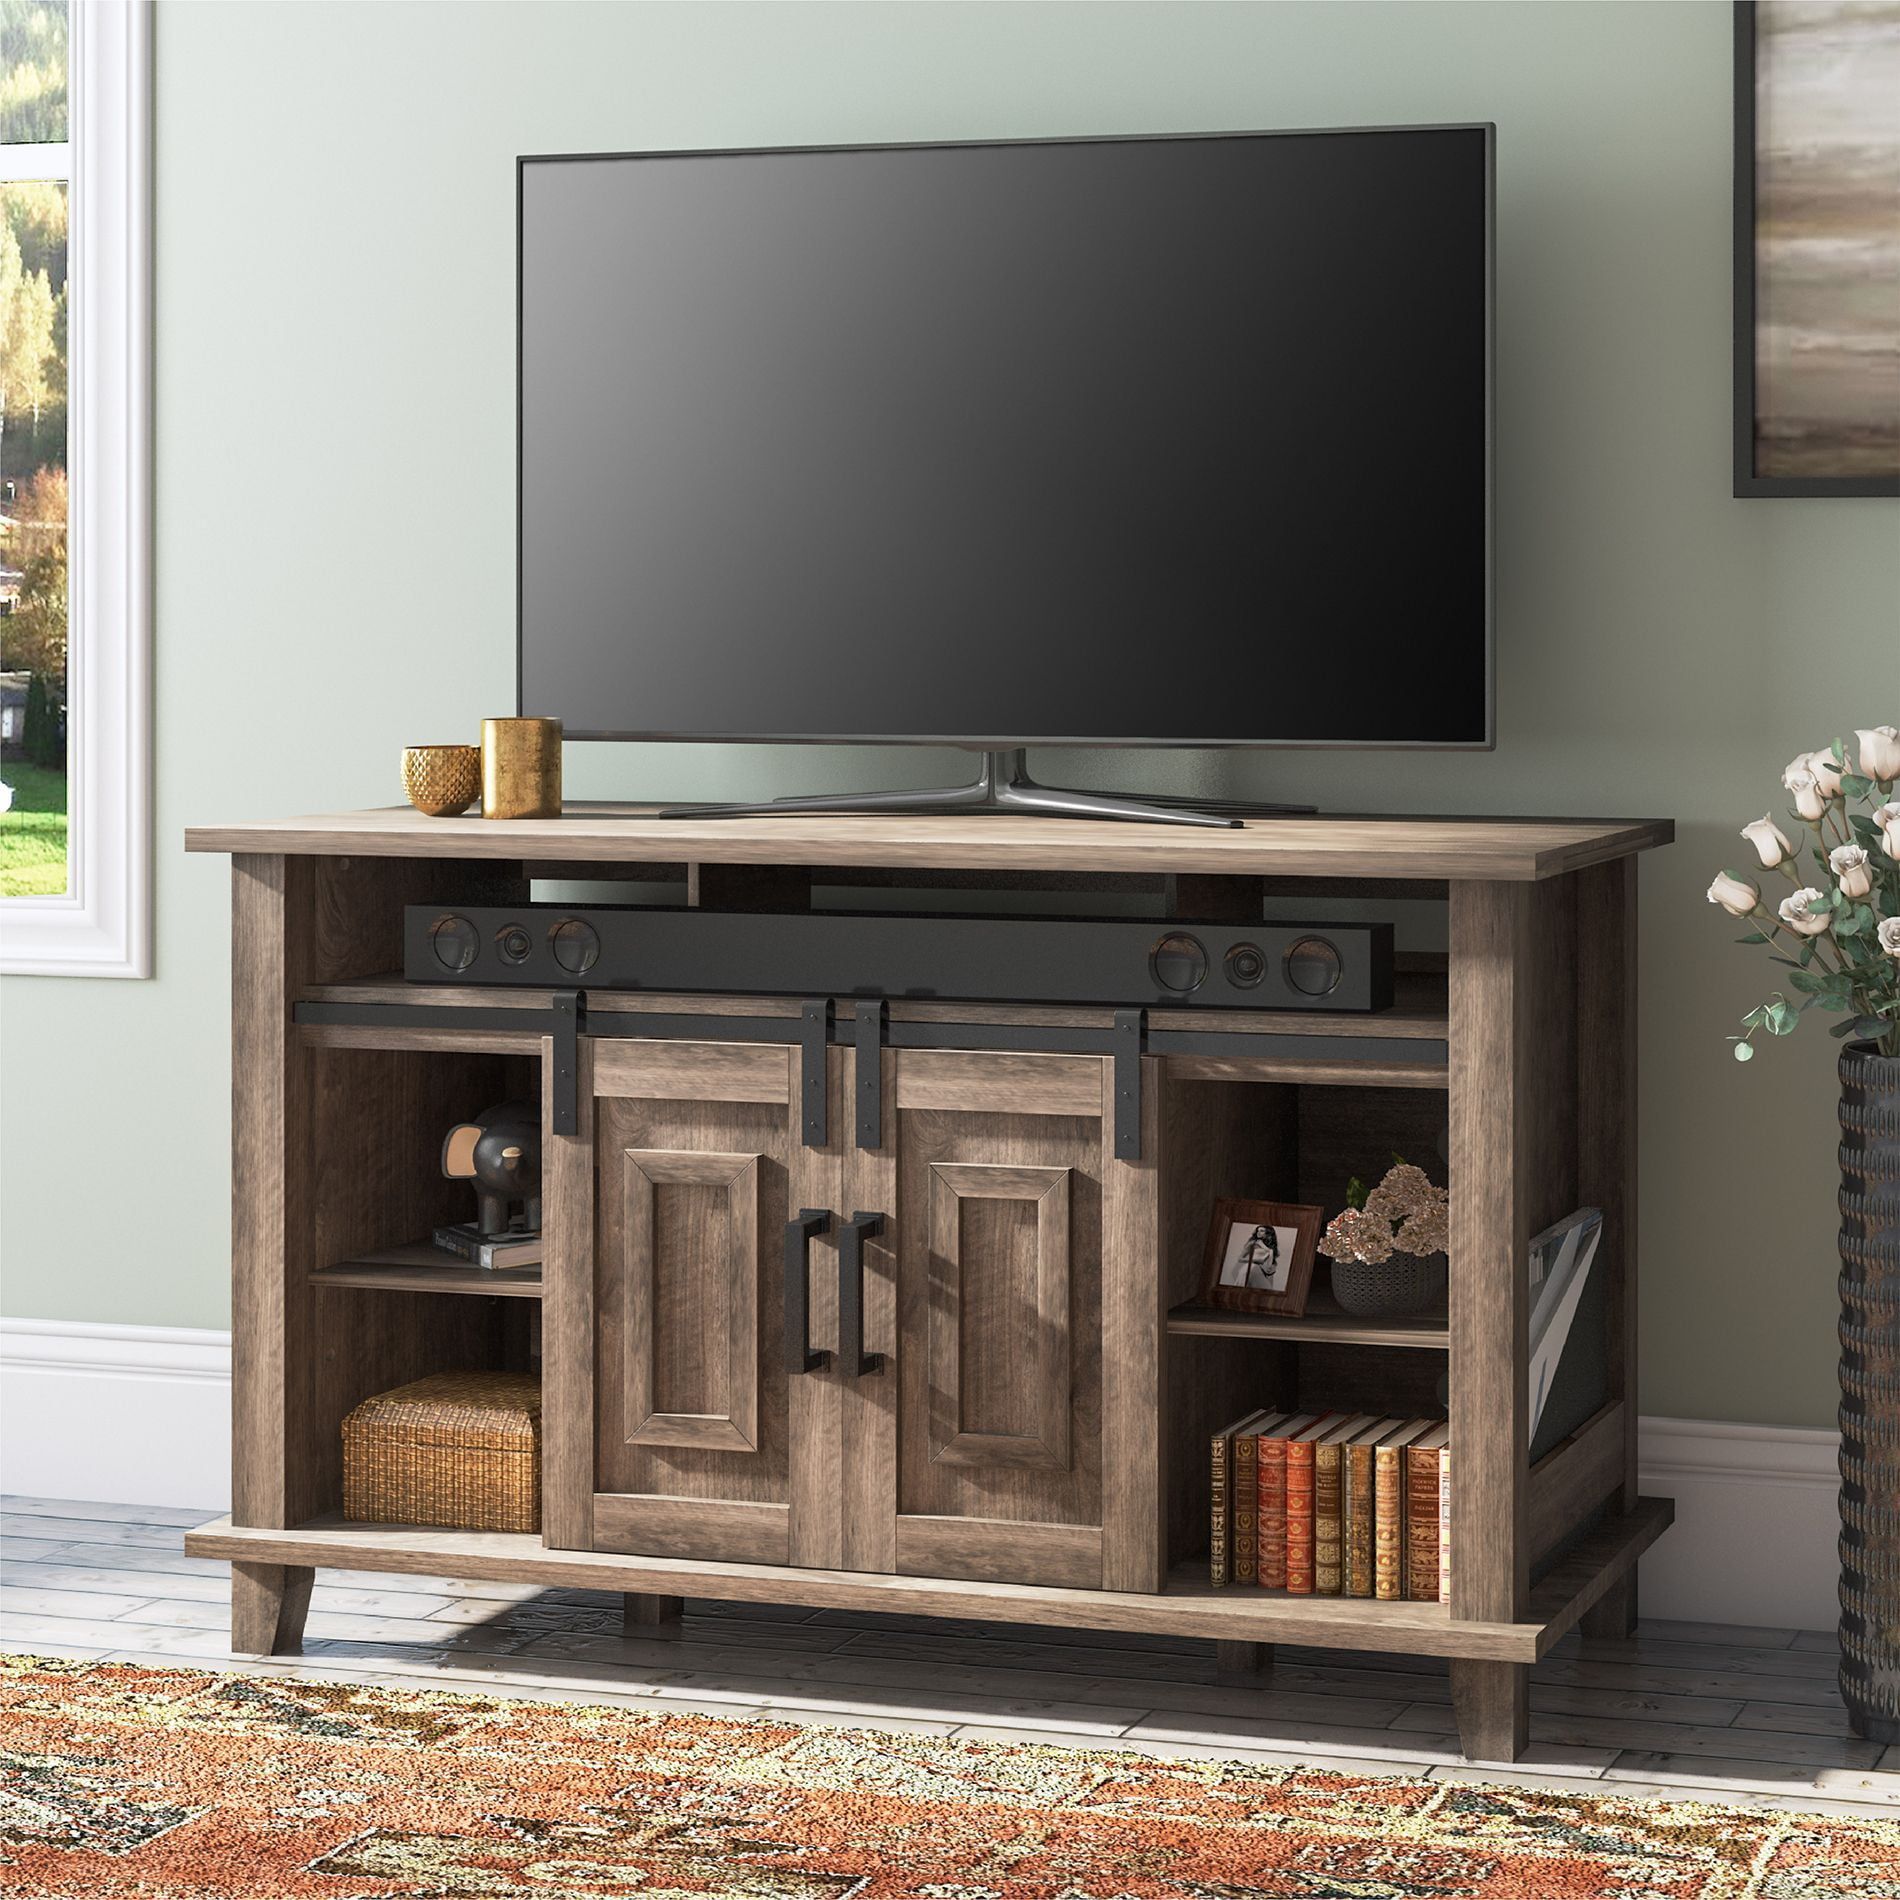 Wampat Farmhouse Sliding Barn Door Tv Stand, Gray Wood Tv Stands For 60 Within Modern Farmhouse Barn Tv Stands (Gallery 14 of 20)